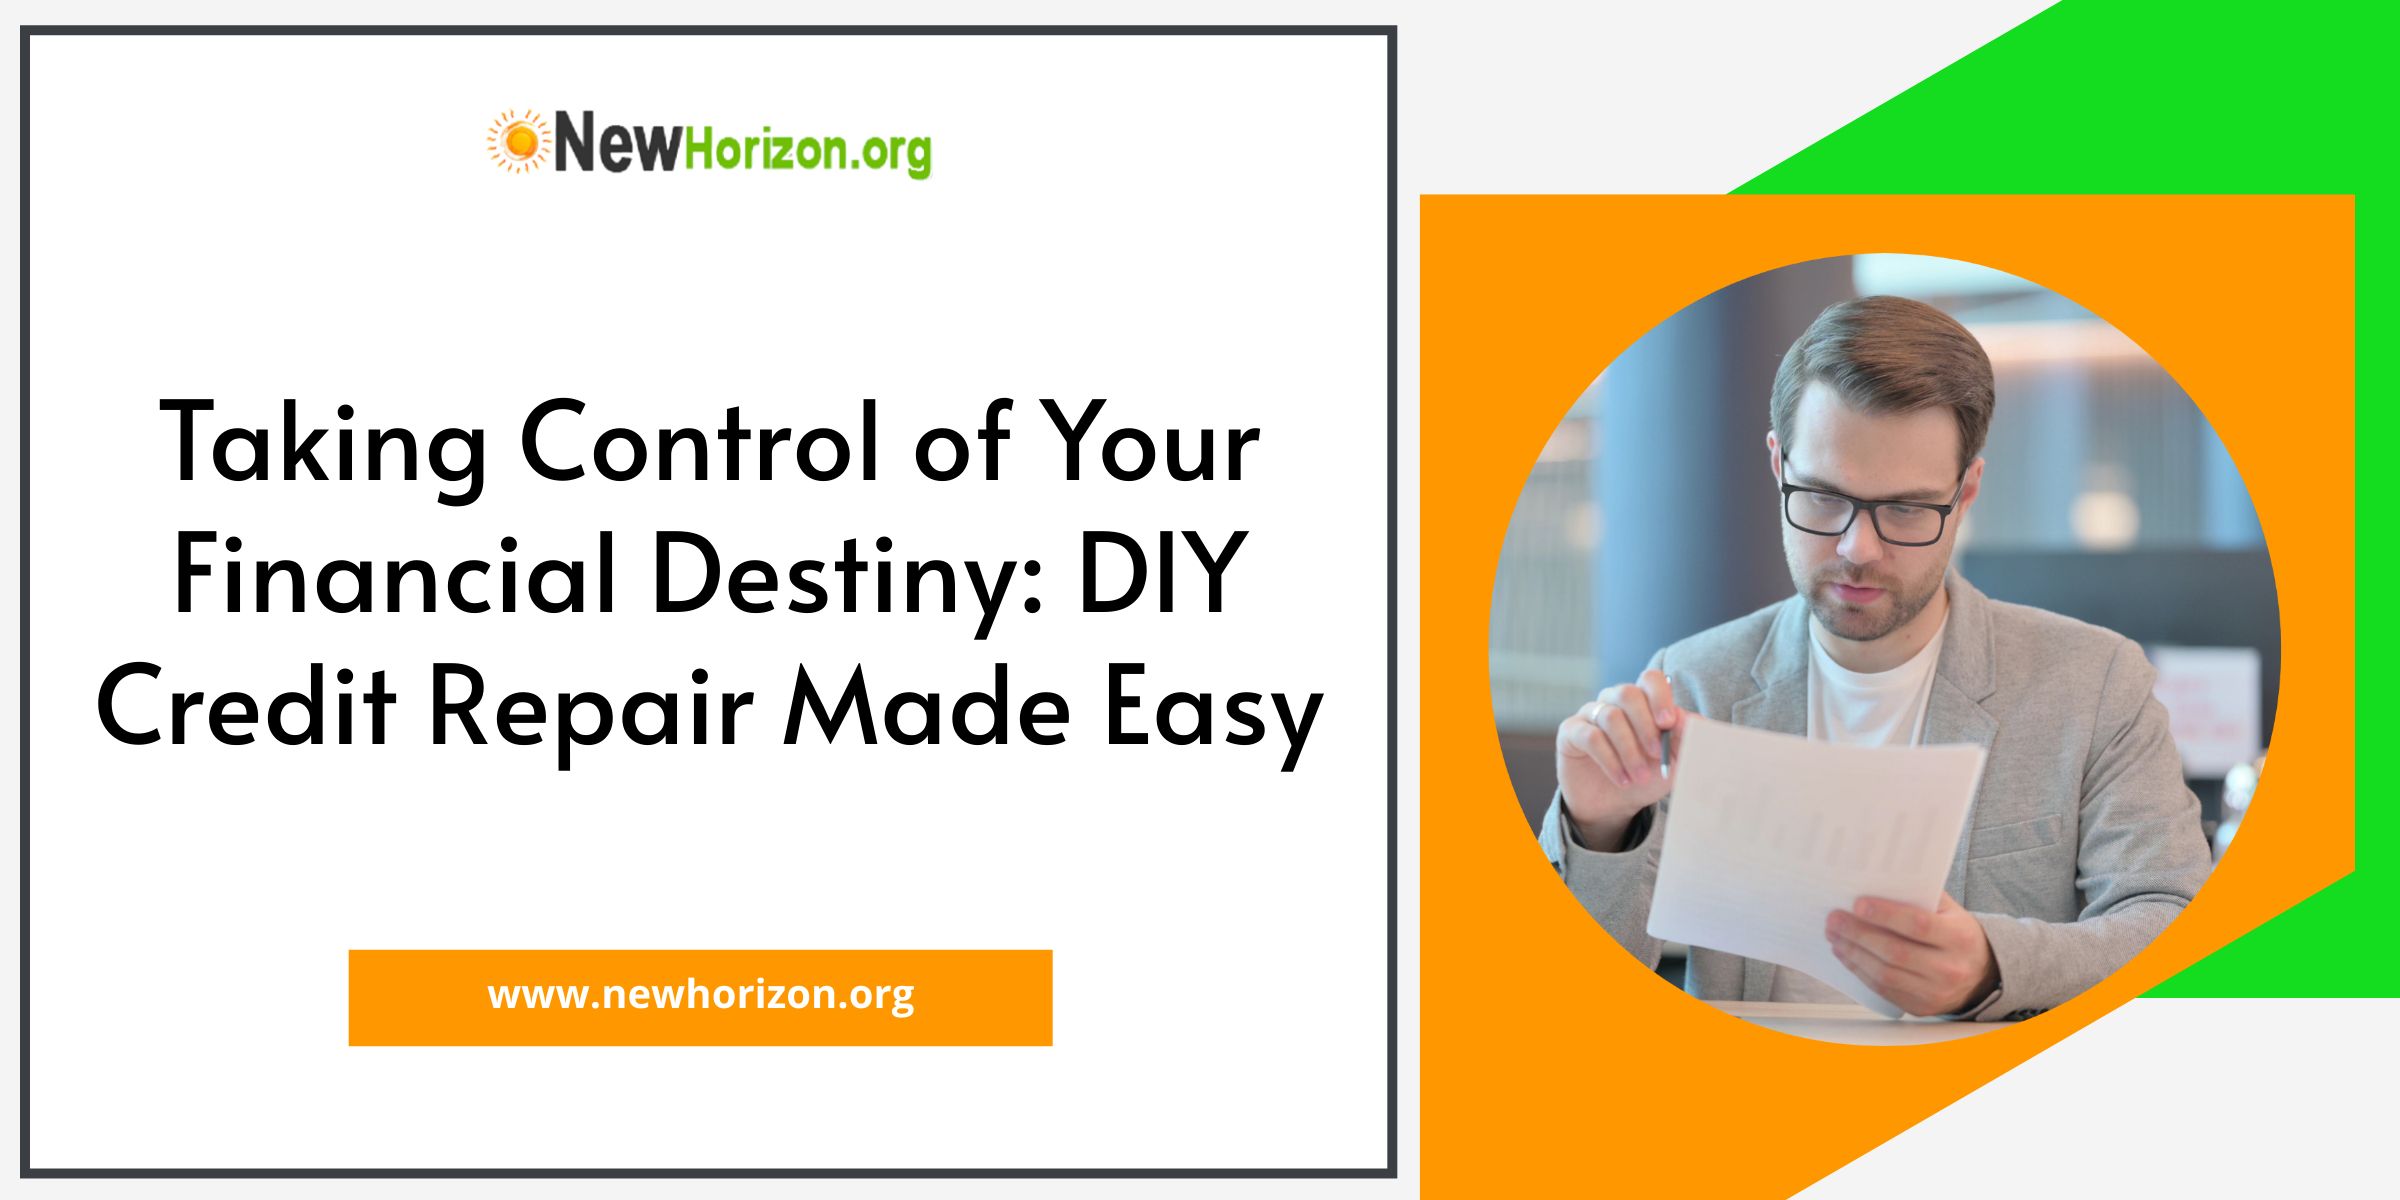 Taking Control of Your Financial Destiny: DIY Credit Repair Made Easy